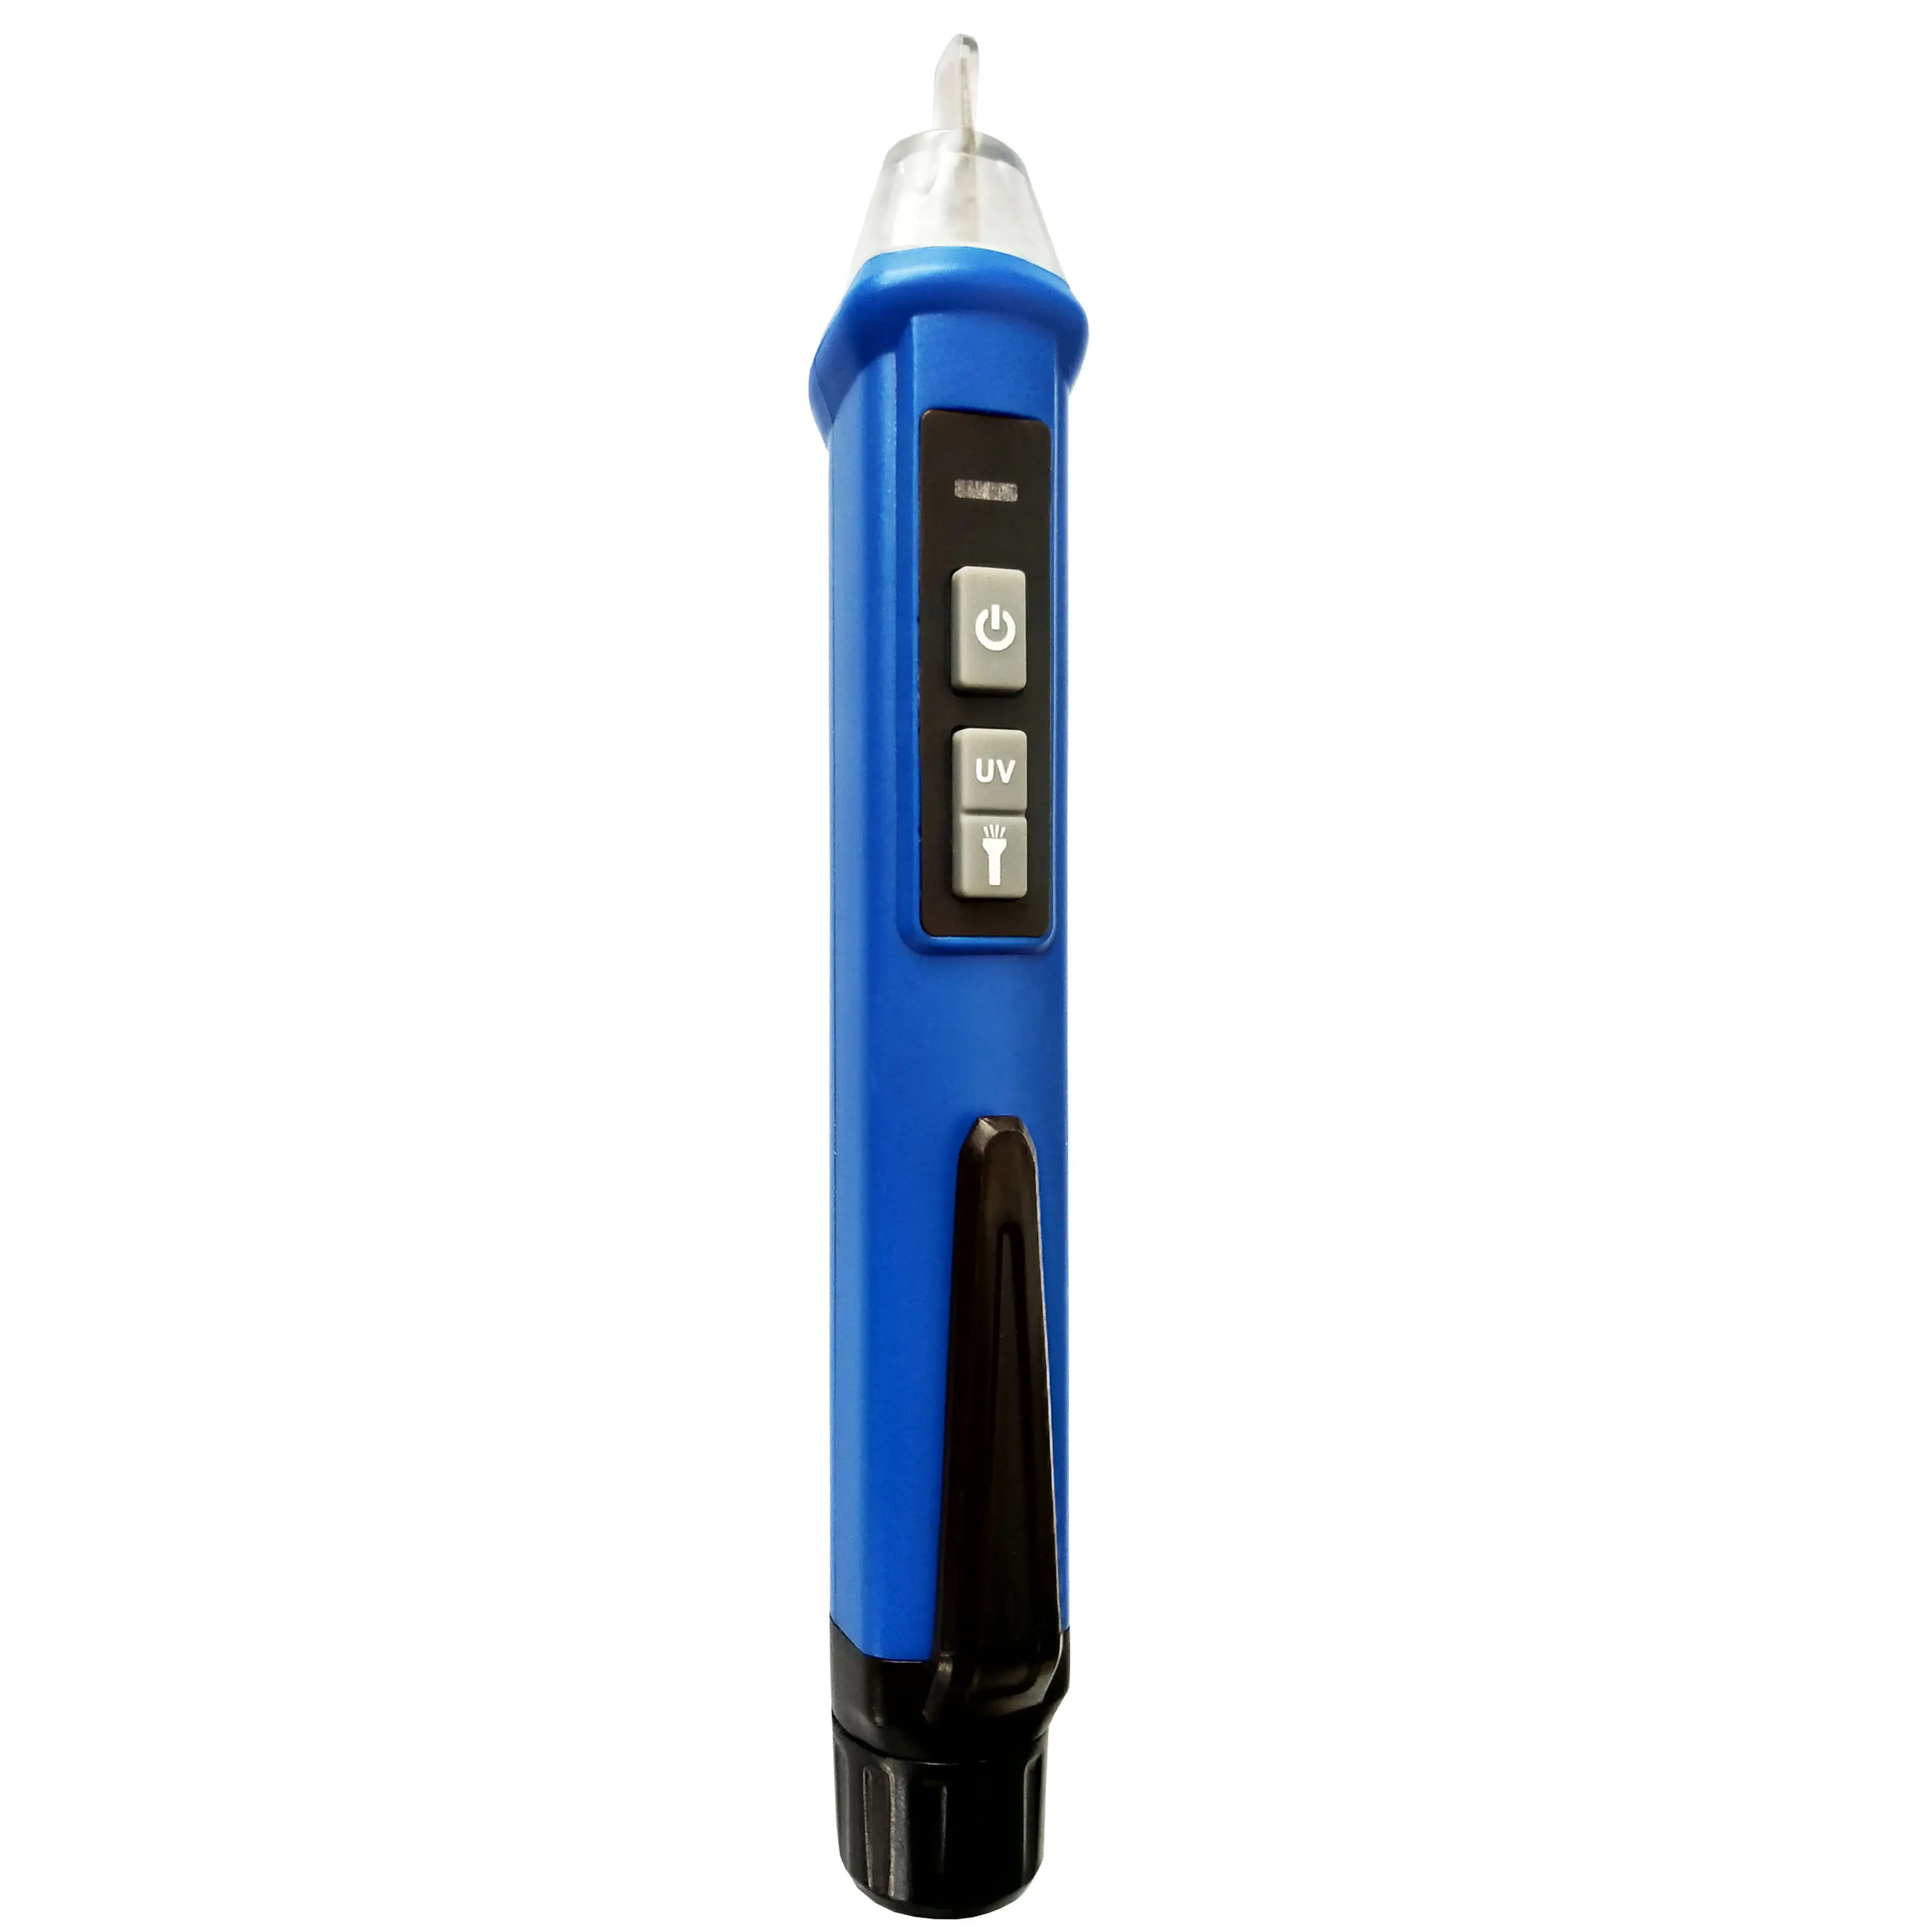 Professional Non-Contact AC High Voltage Detector with Flashlight UV light Function